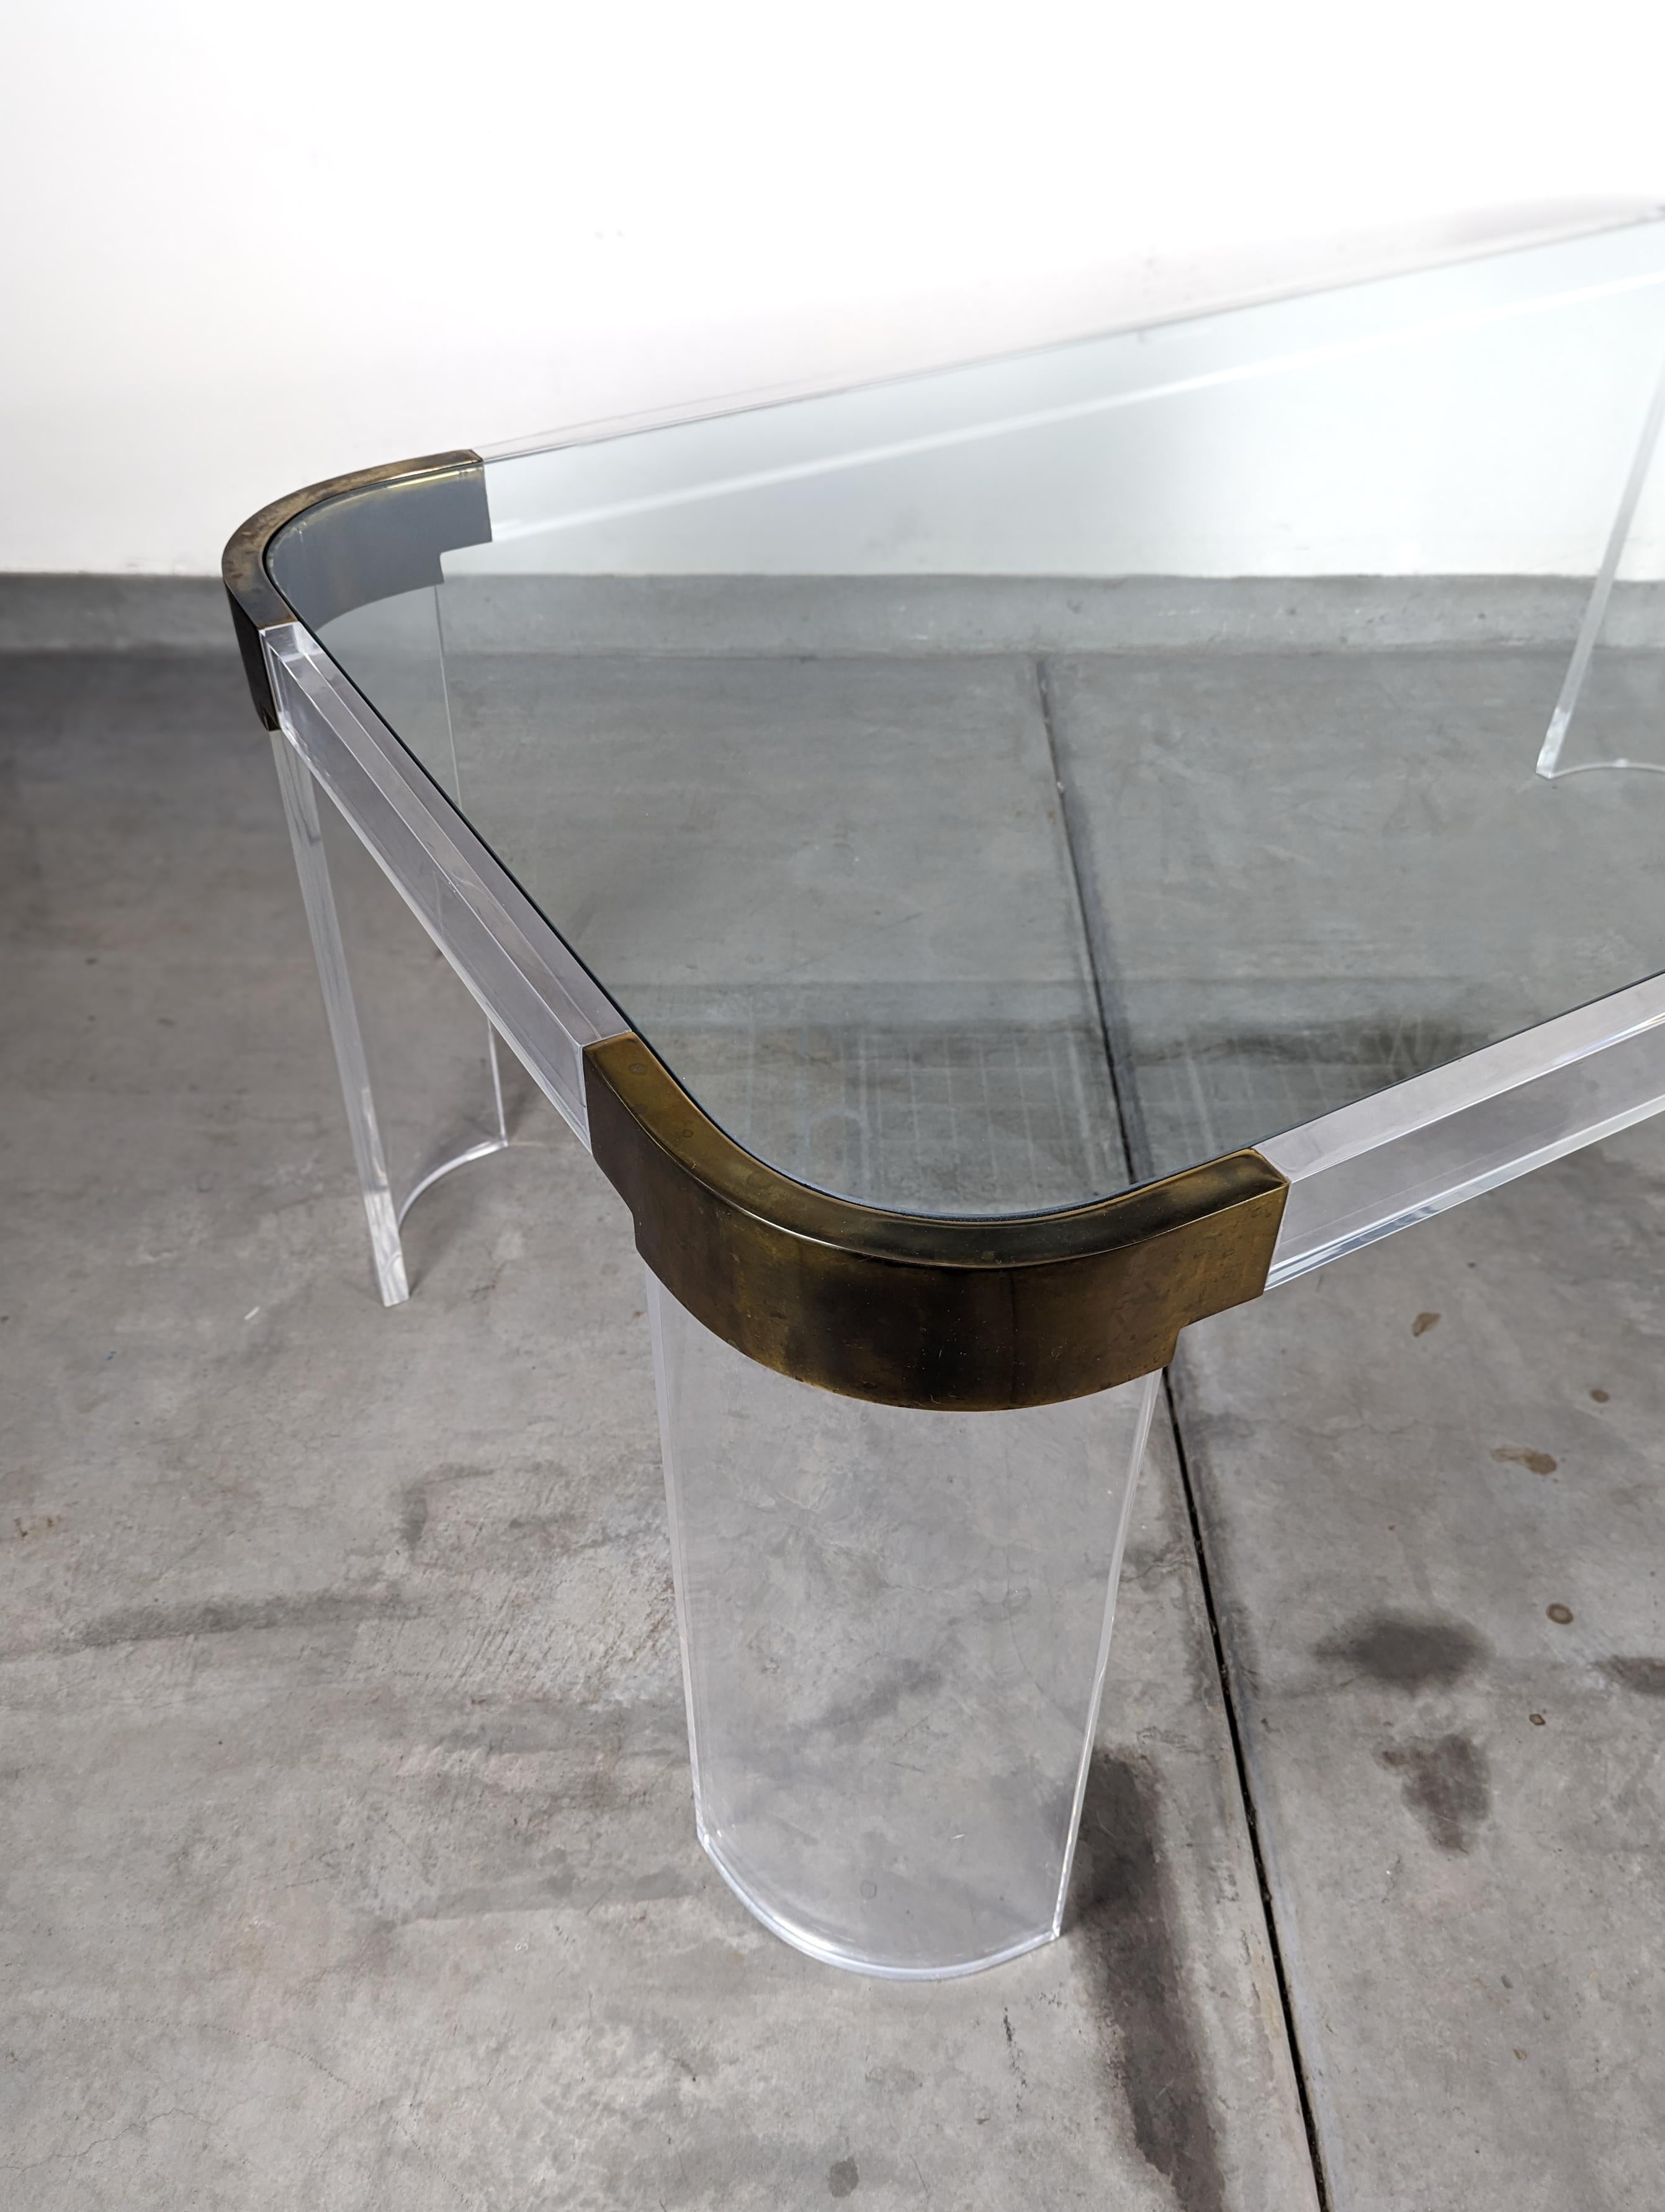 Brass Lucite Dining Table by Charles Hollis Jones from the 